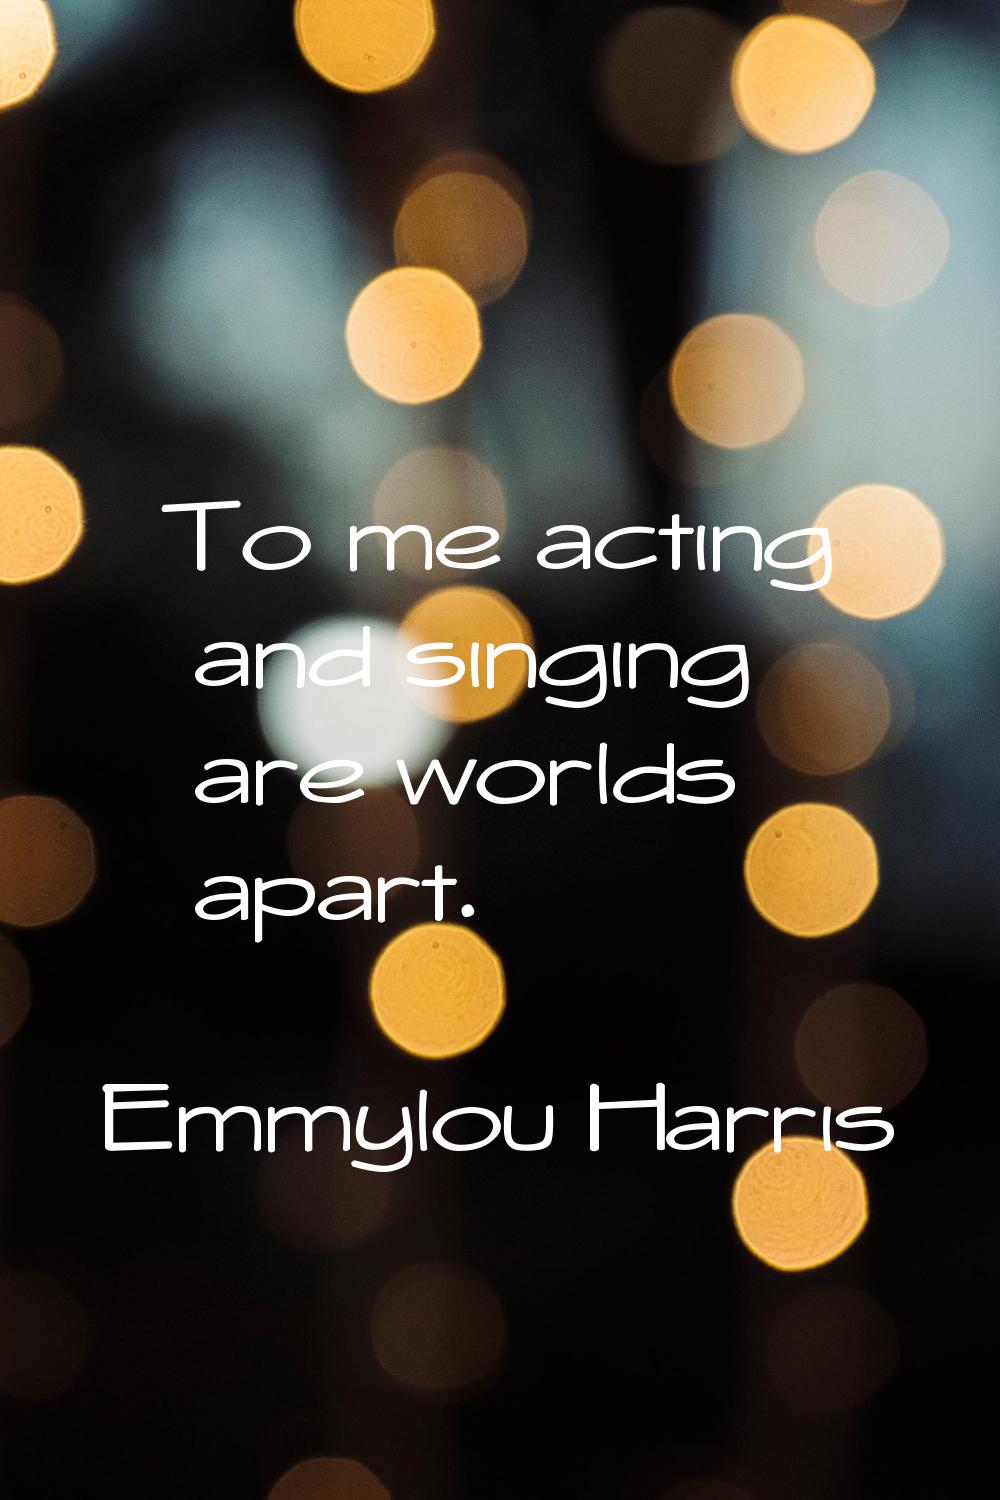 To me acting and singing are worlds apart.